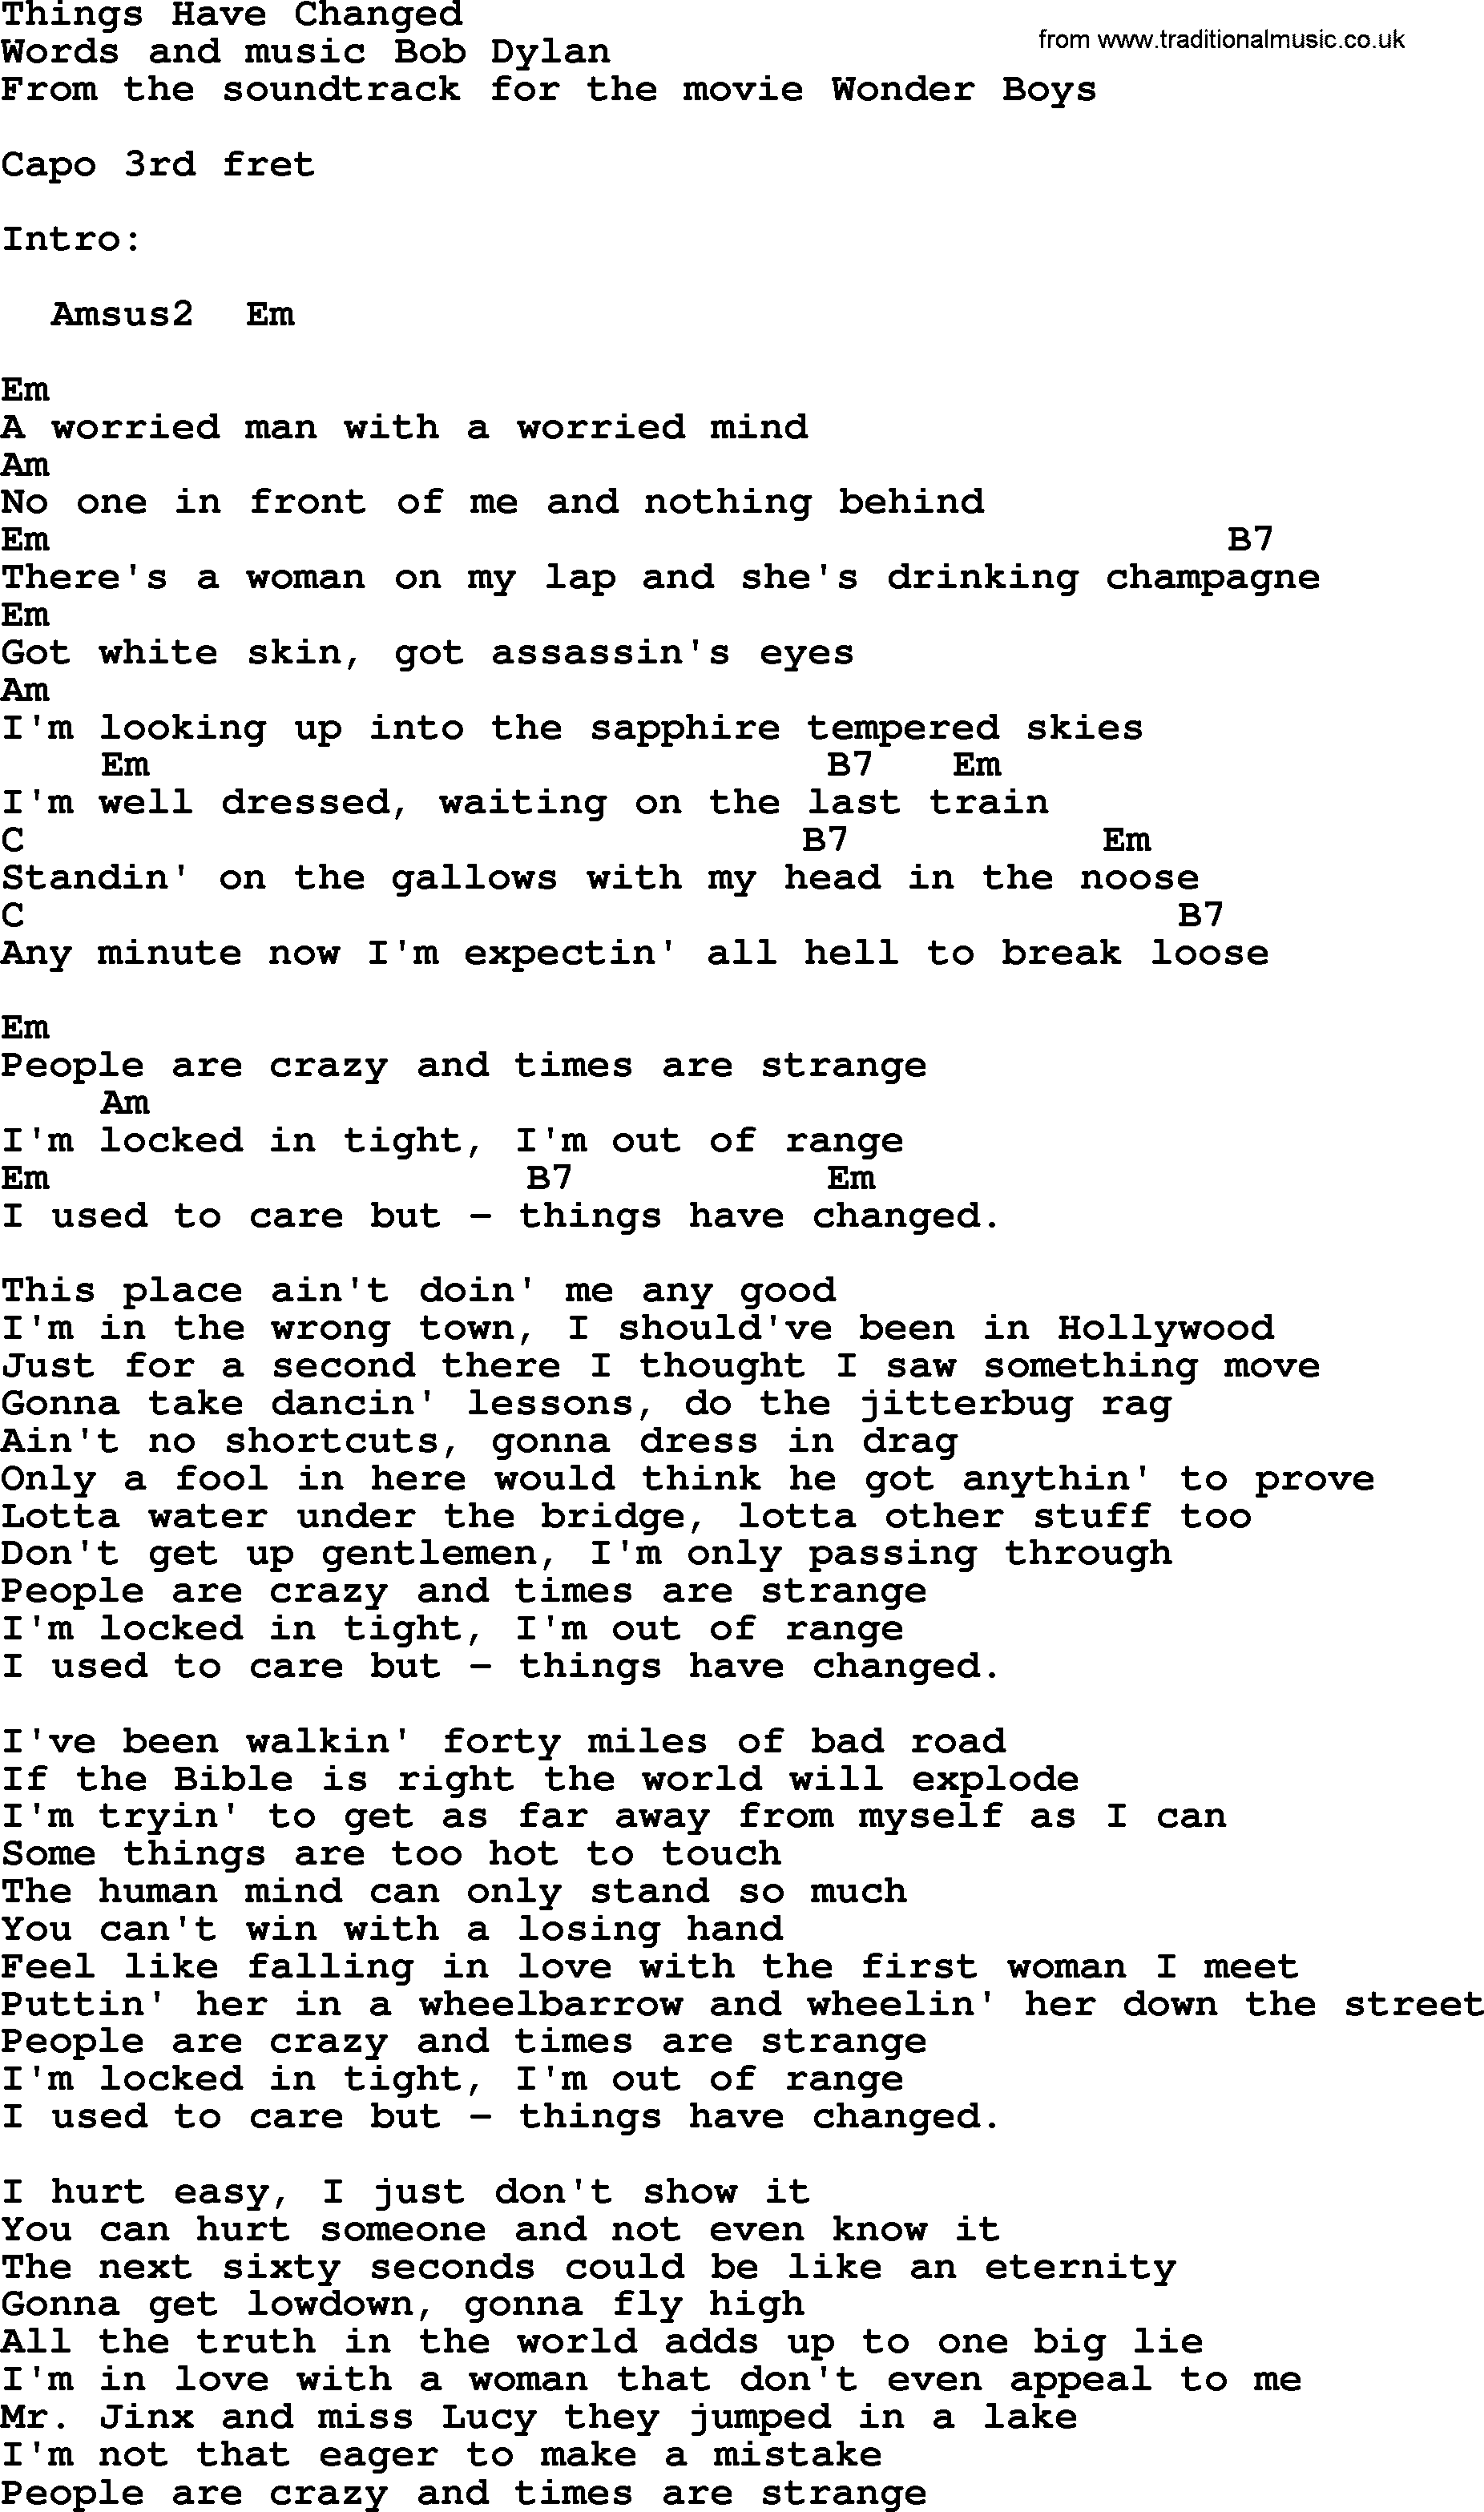 Bob Dylan song, lyrics with chords - Things Have Changed